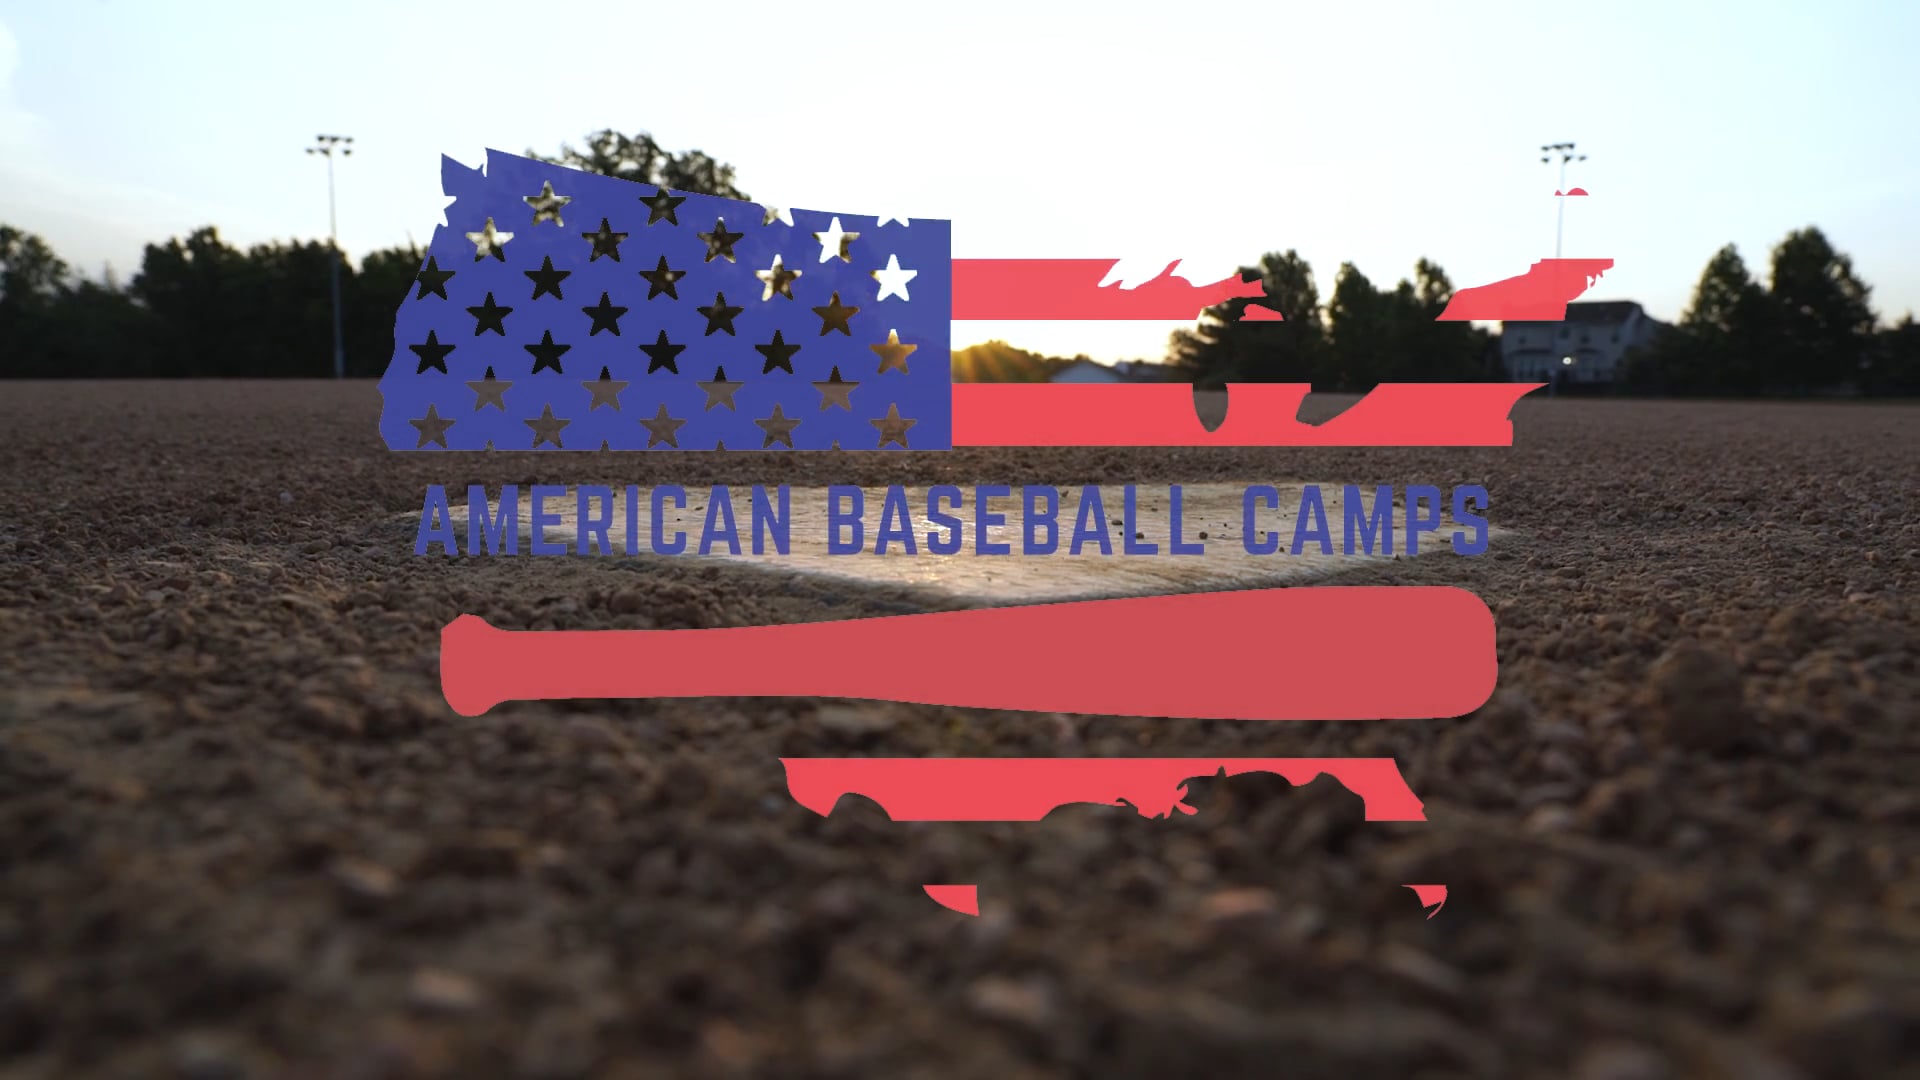 American Baseball Camps - $2,000 Project